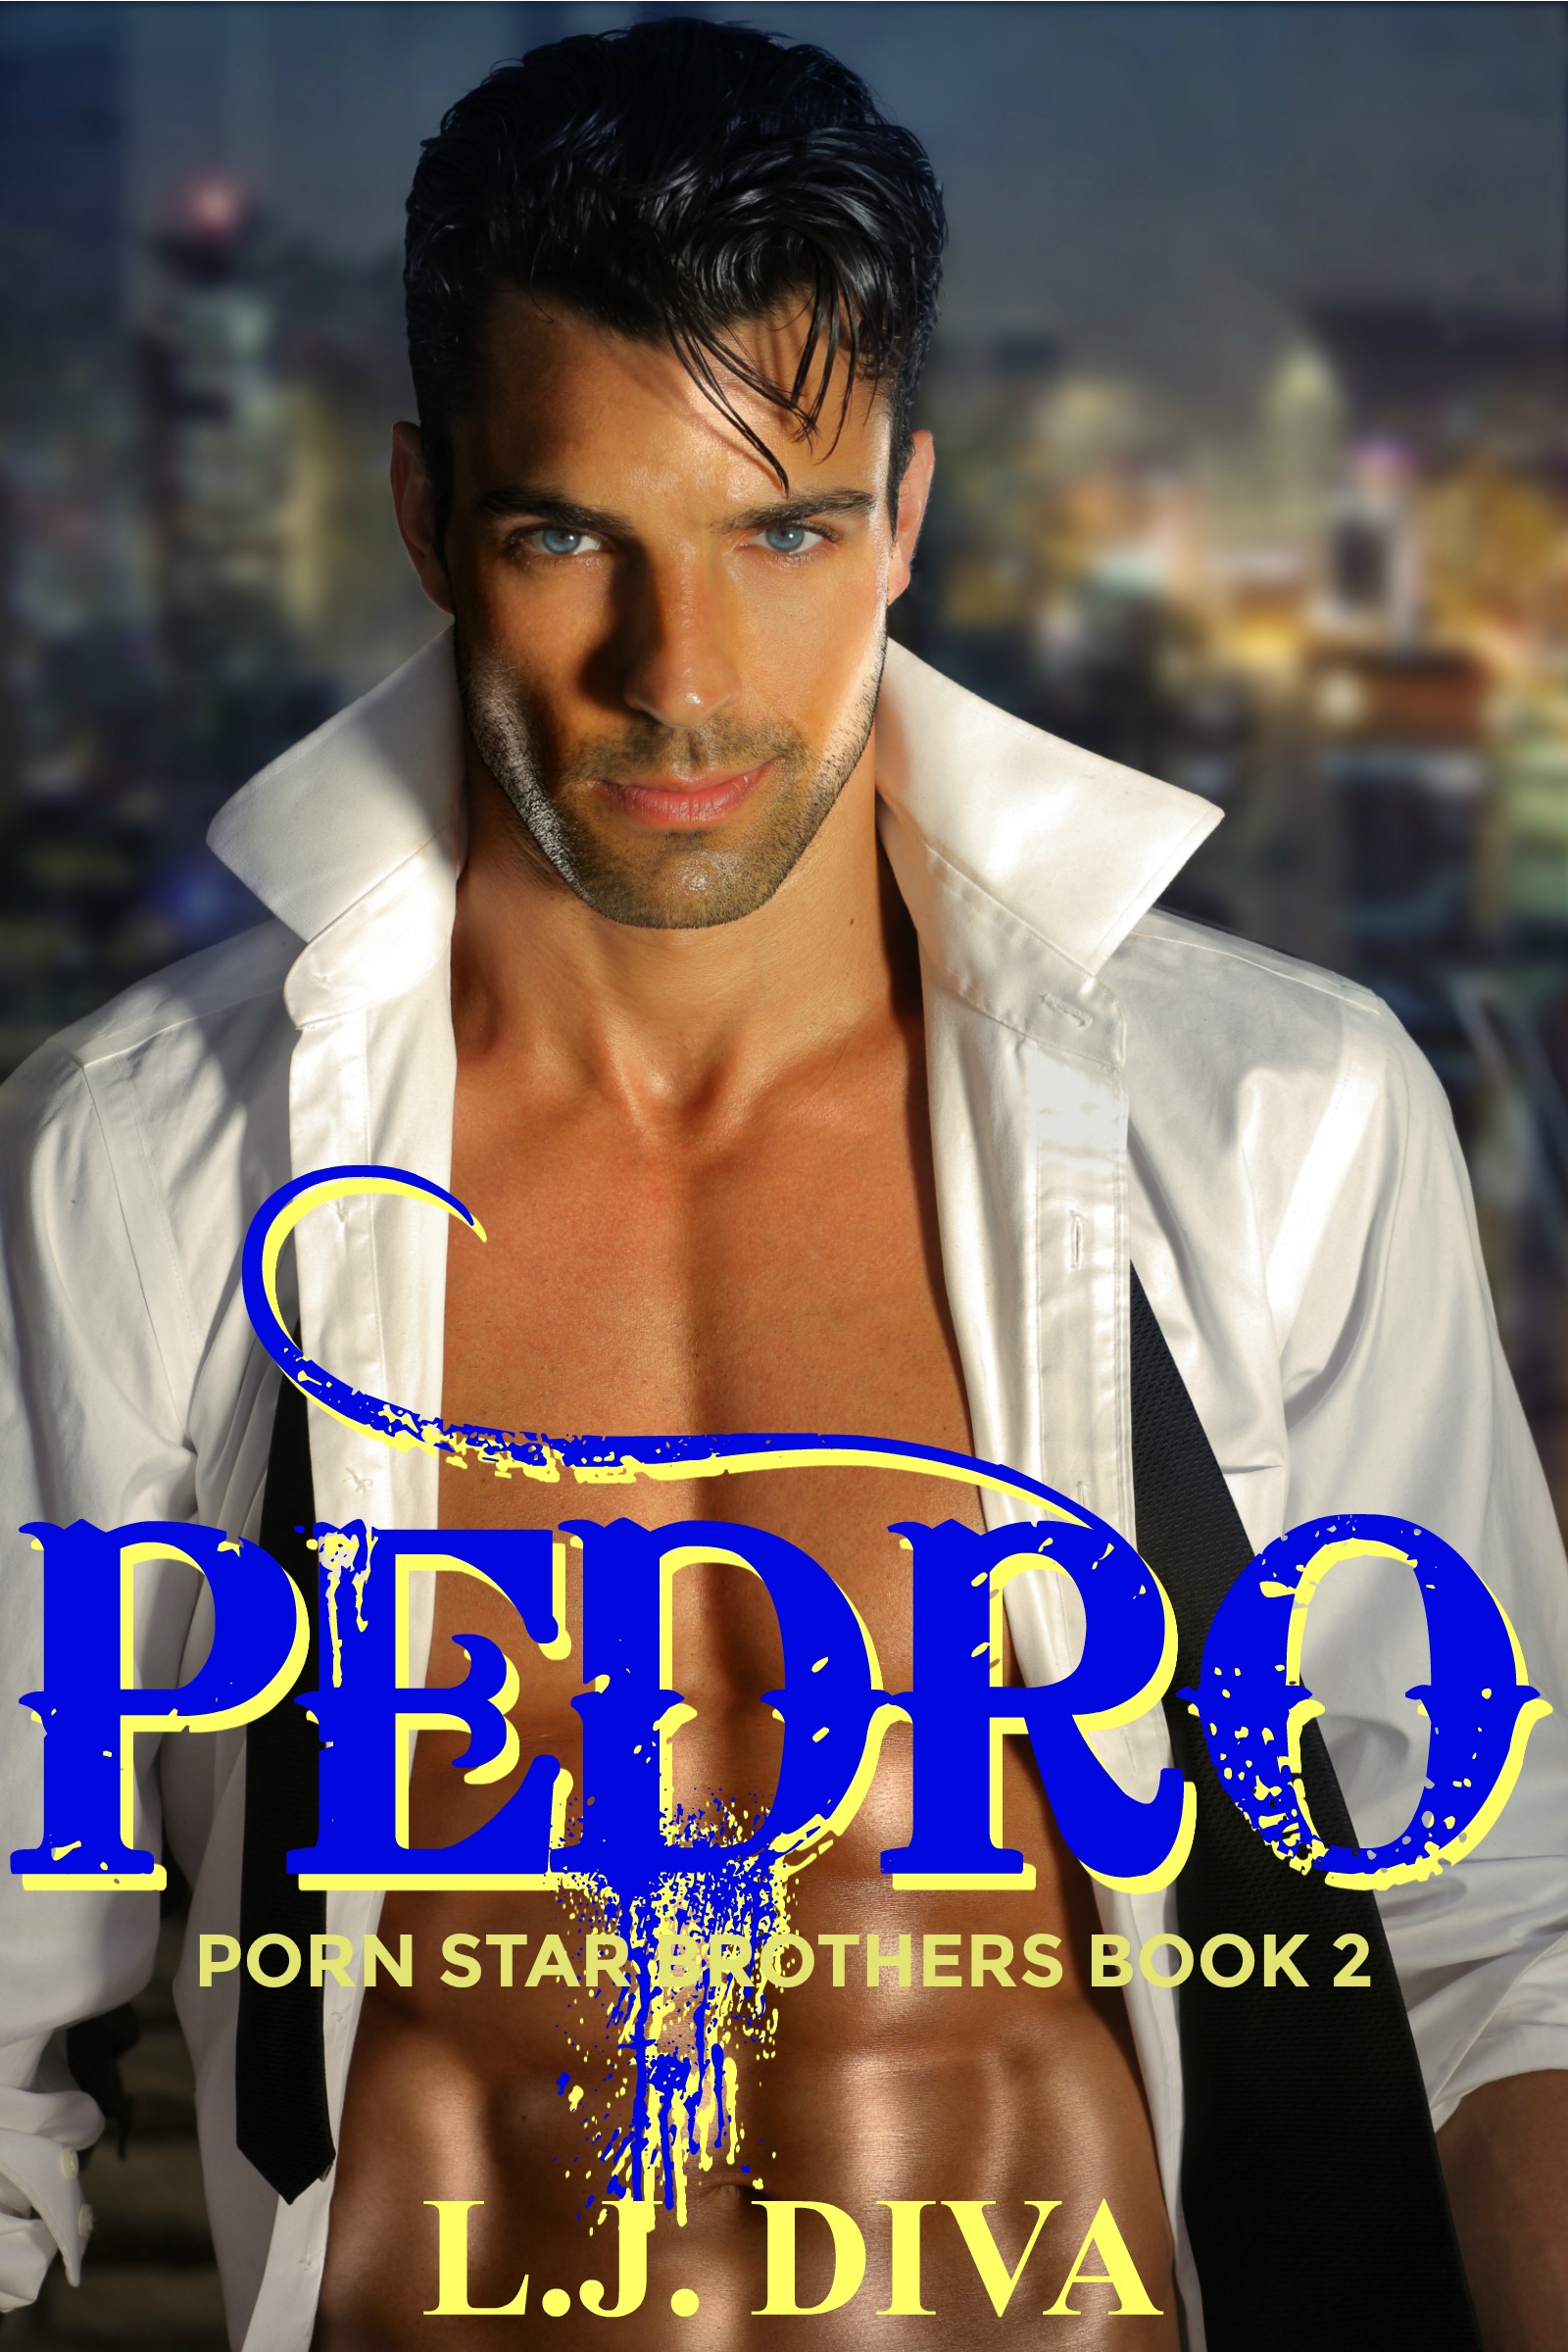 1600px x 2400px - Pedro, Porn Star Brothers Book 2 is now available for sale at Amazon, Kobo,  Barnes & Noble, Smashwords and other retailers - Tiara King - Creative  Artist